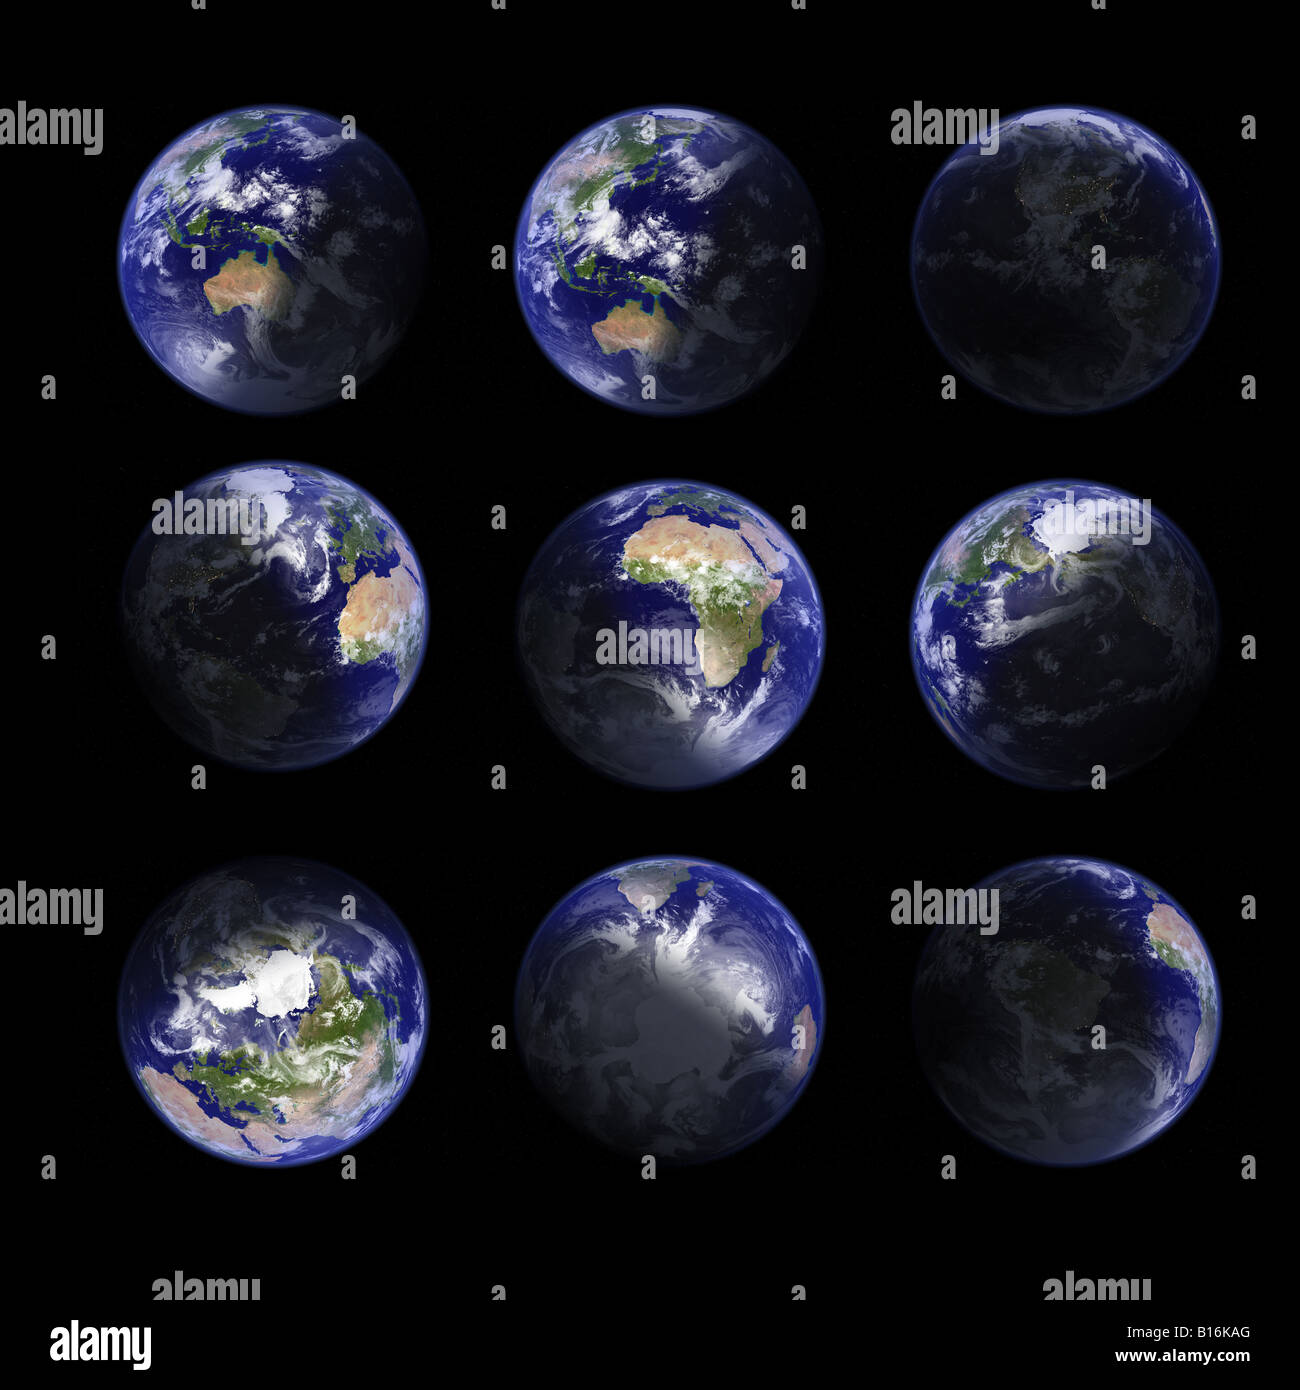 Earth planet, ultrahigh resolution, real topography rendering. Different views and different time of day: day view, night view Stock Photo